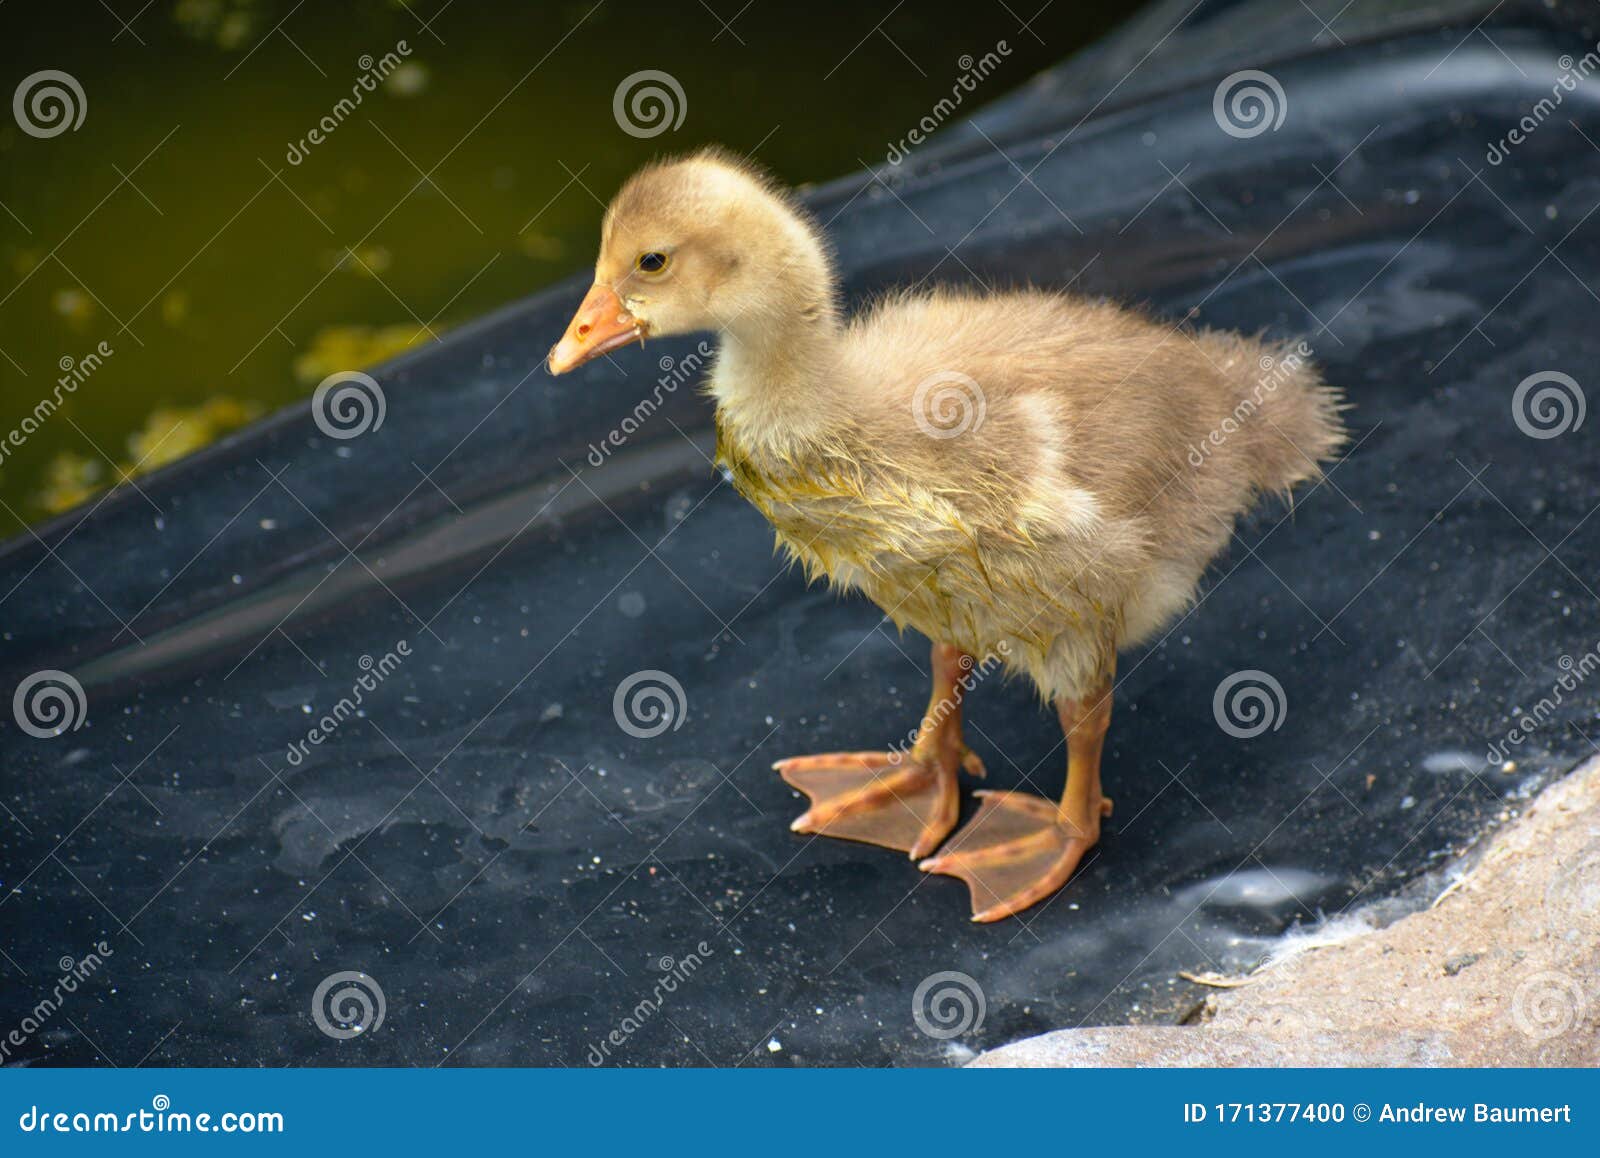 baby yellow goose chick standing near a pond in barranco miraflores lima peru